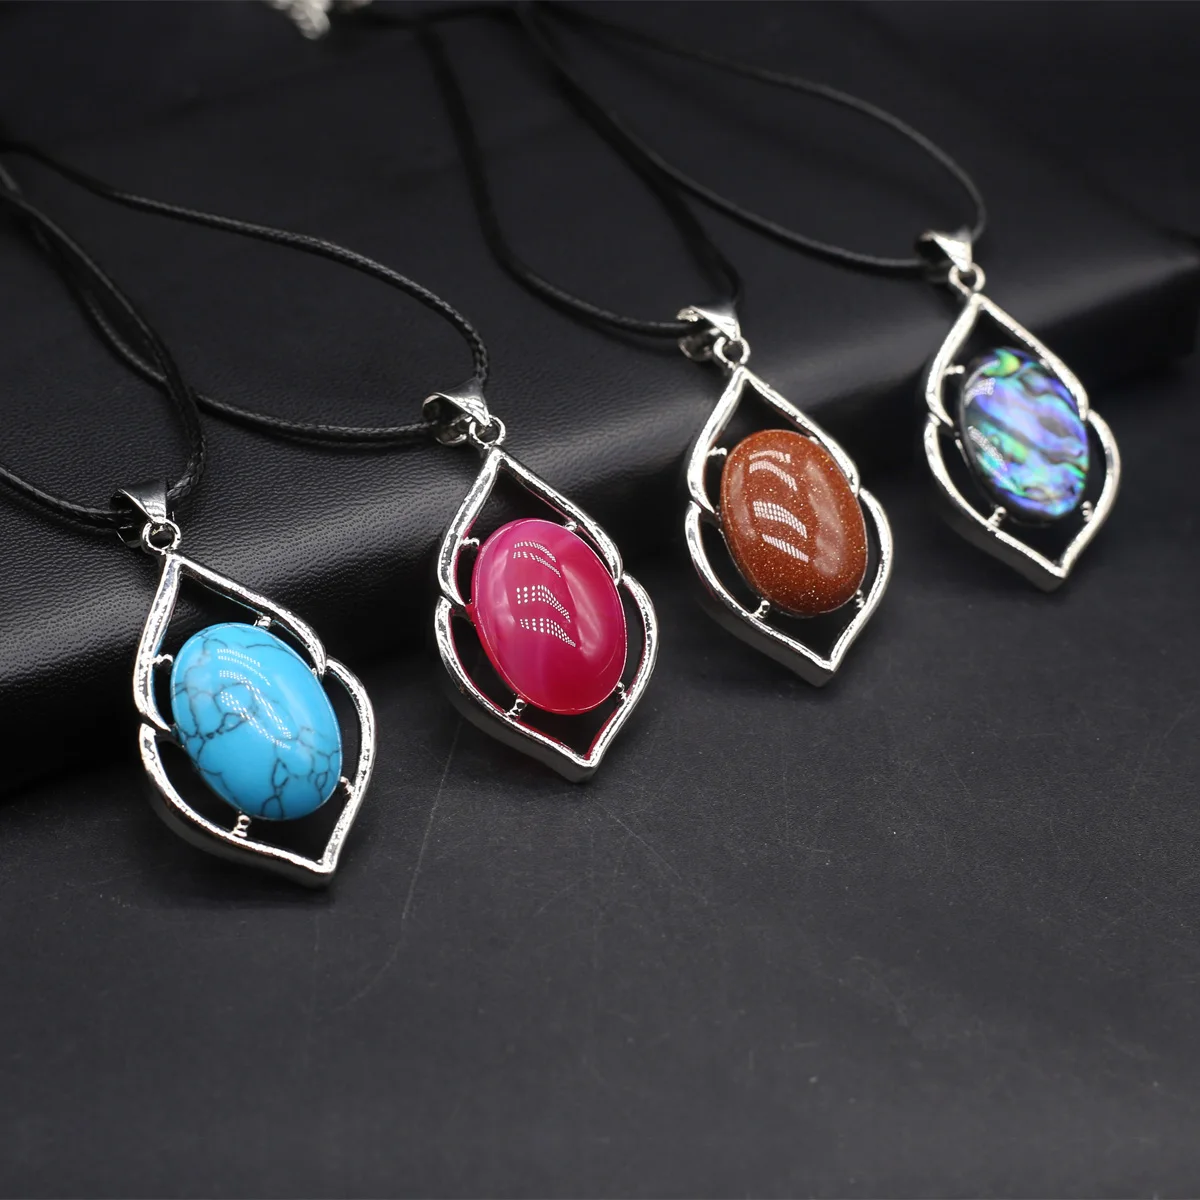 

New Style Necklace Natural Stone Oval Diamond Pendant Leather Chain For Women Romantic Gift Droppshing